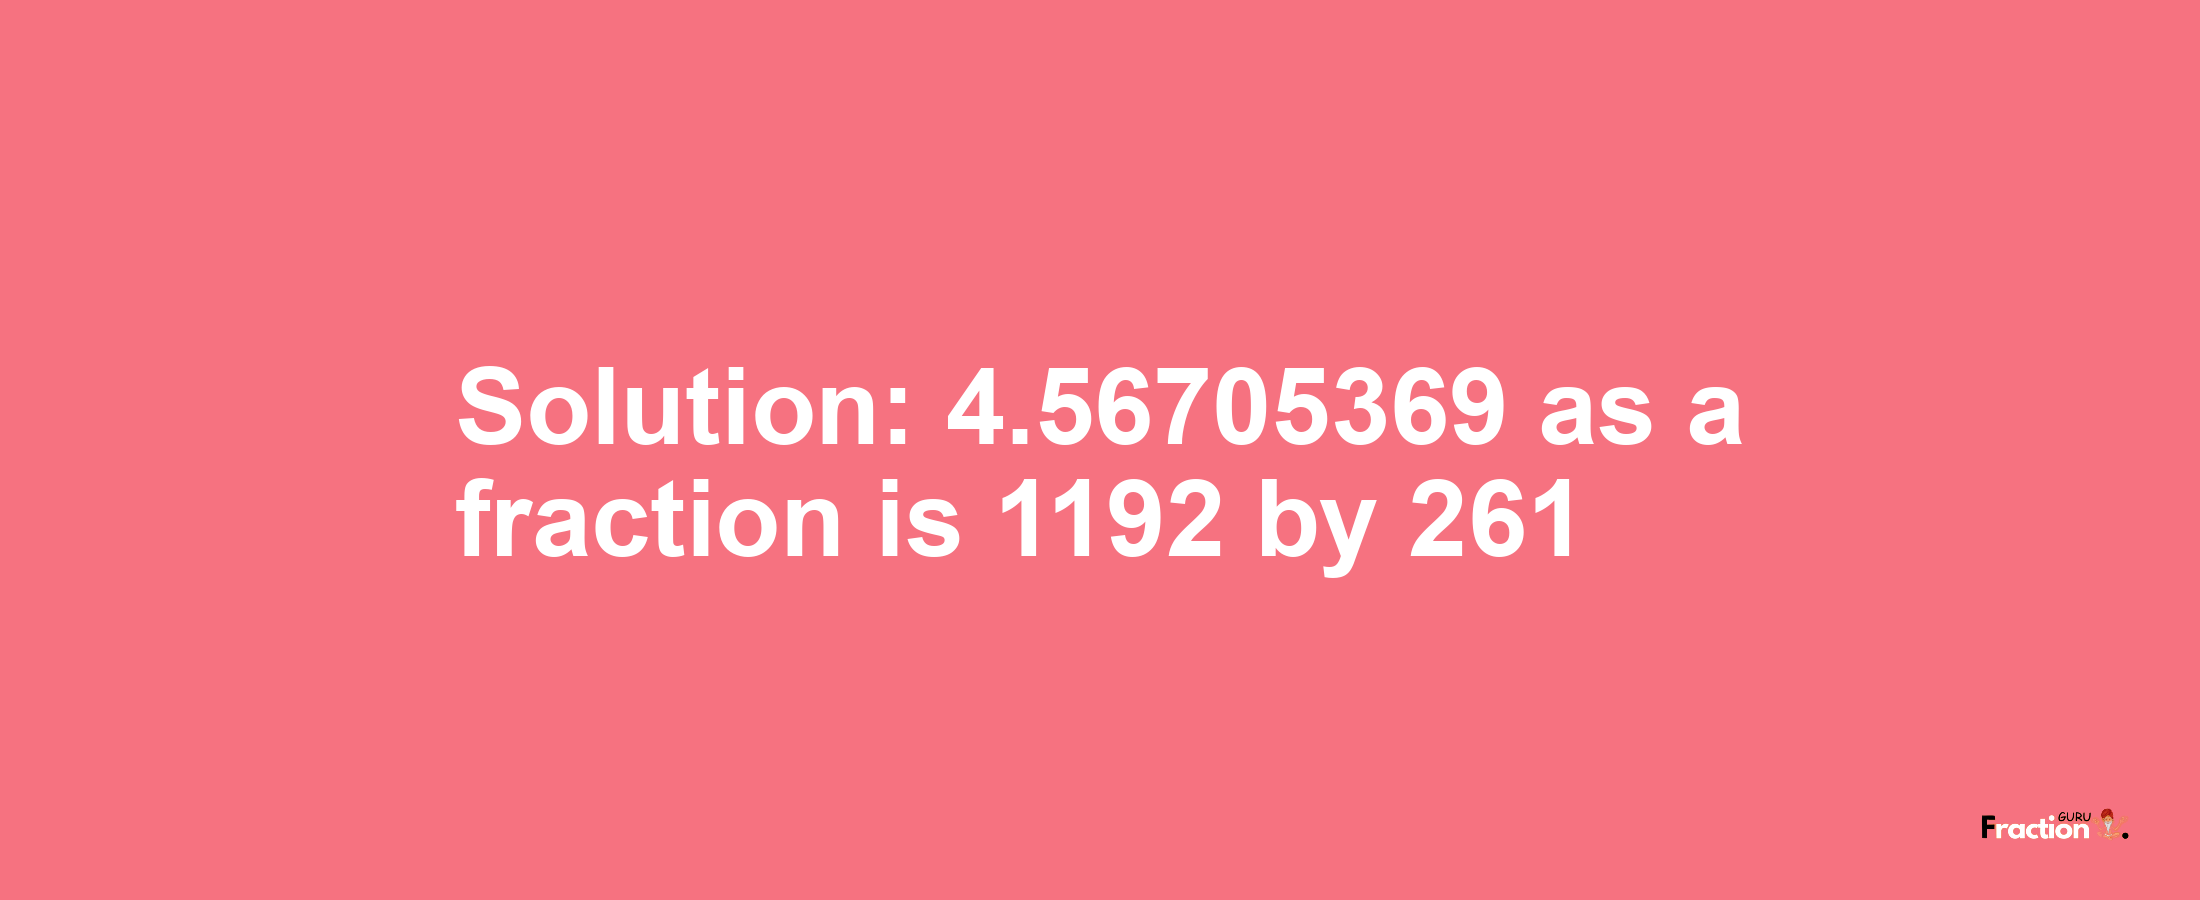 Solution:4.56705369 as a fraction is 1192/261